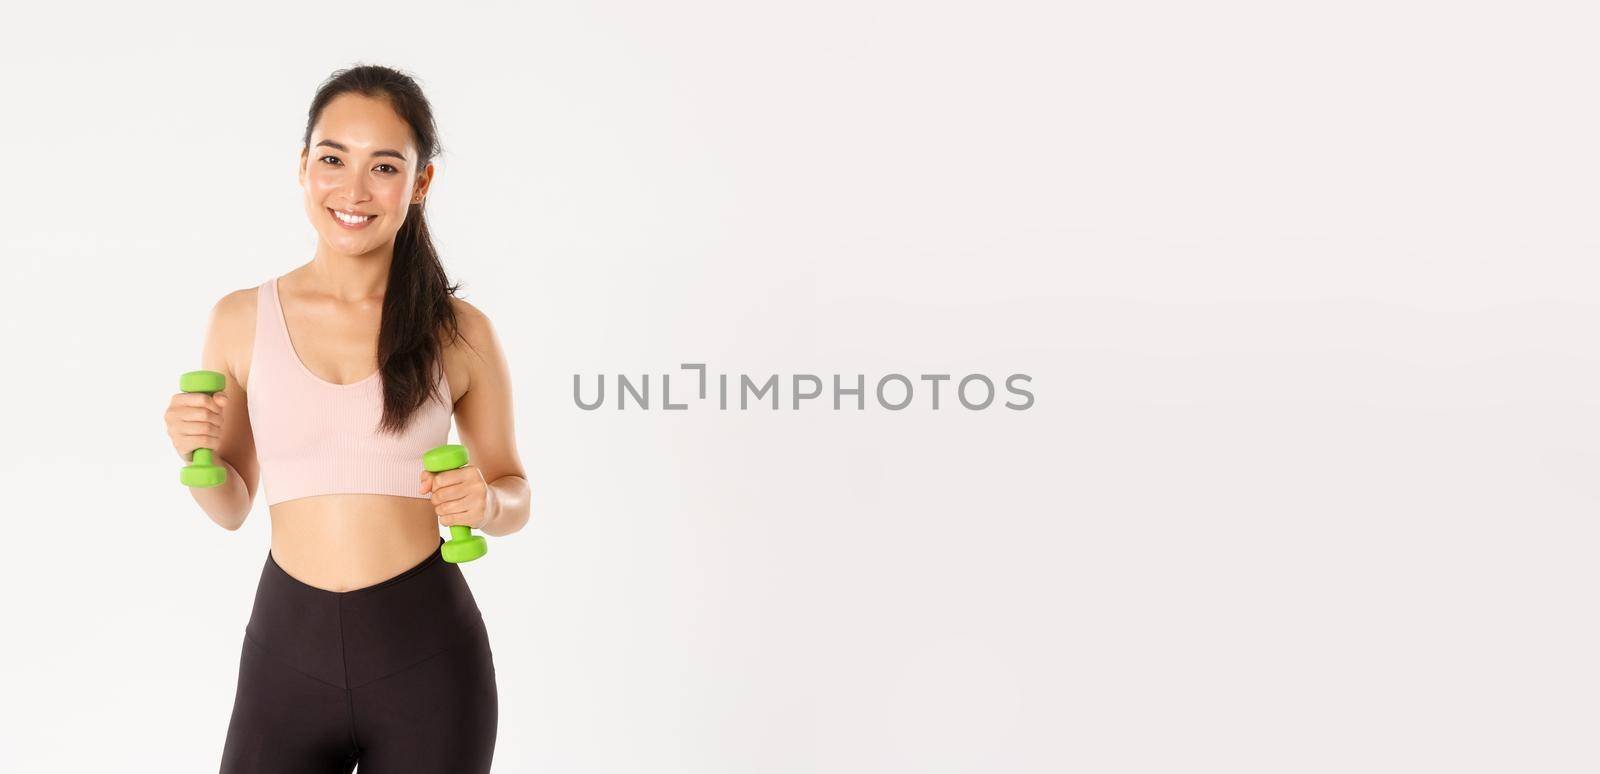 Fitness, healthy lifestyle and wellbeing concept. Portrait of happy slim and strong asian female athlete, sportswoman in activewear holding dumbbells for workout, exercise in gym, white background.